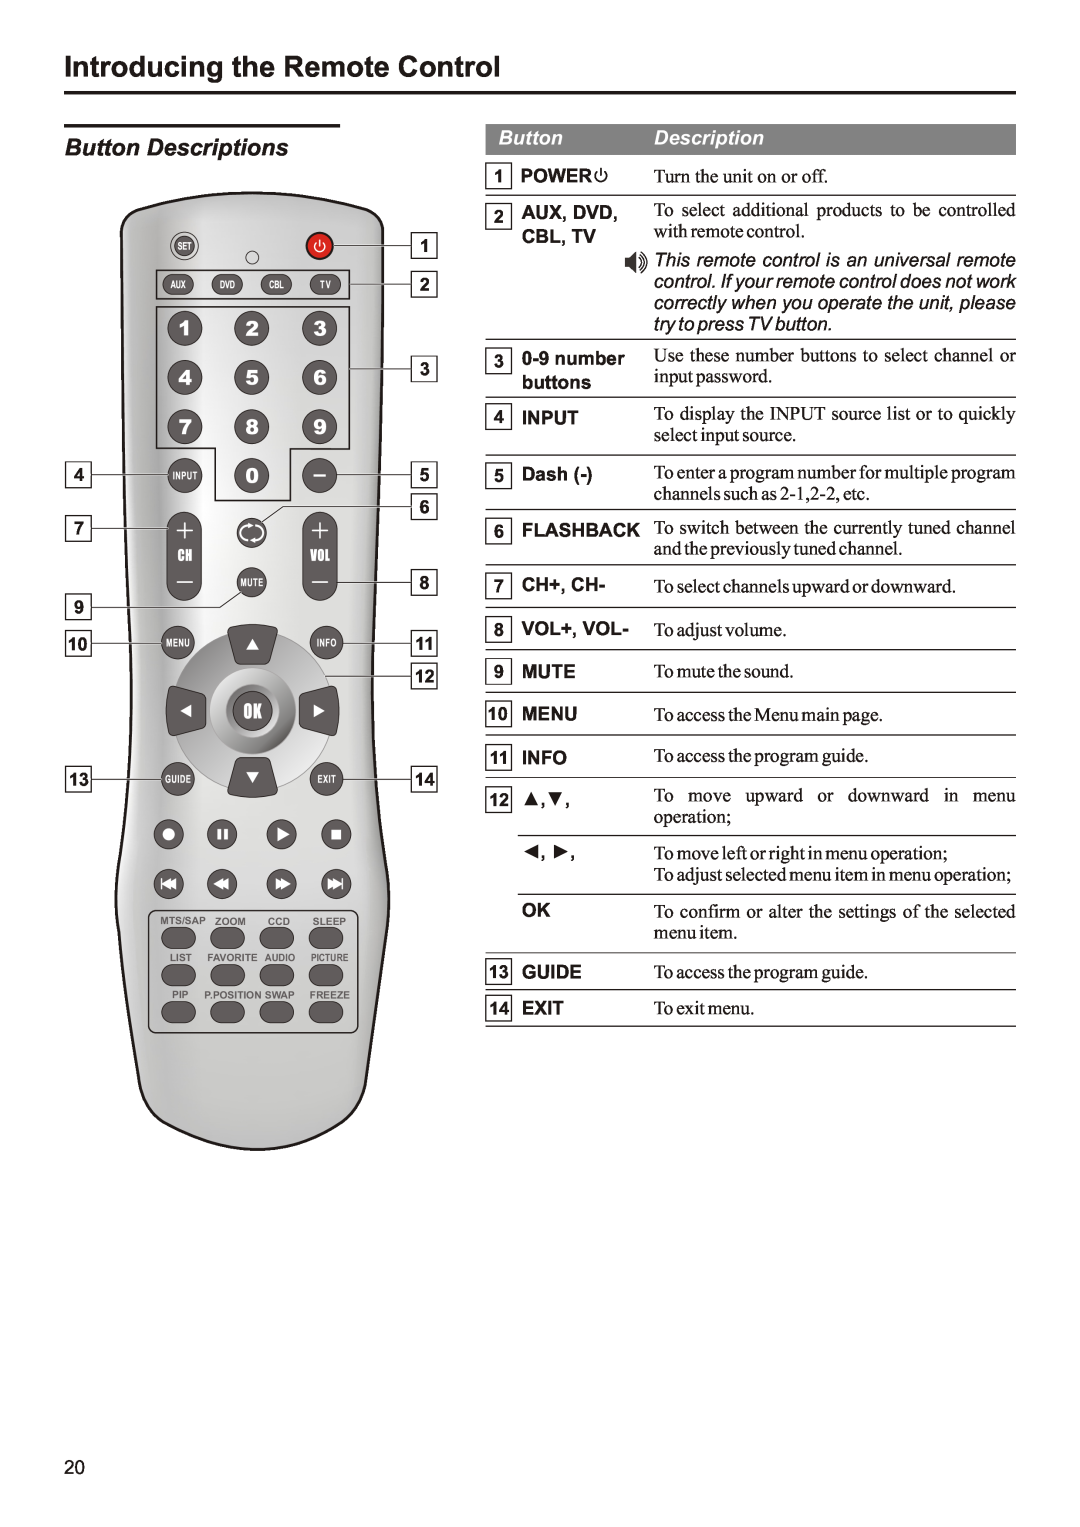 Audiovox FPE3207 Button Descriptions, Introducing the Remote Control, This remote control is an universal remote 